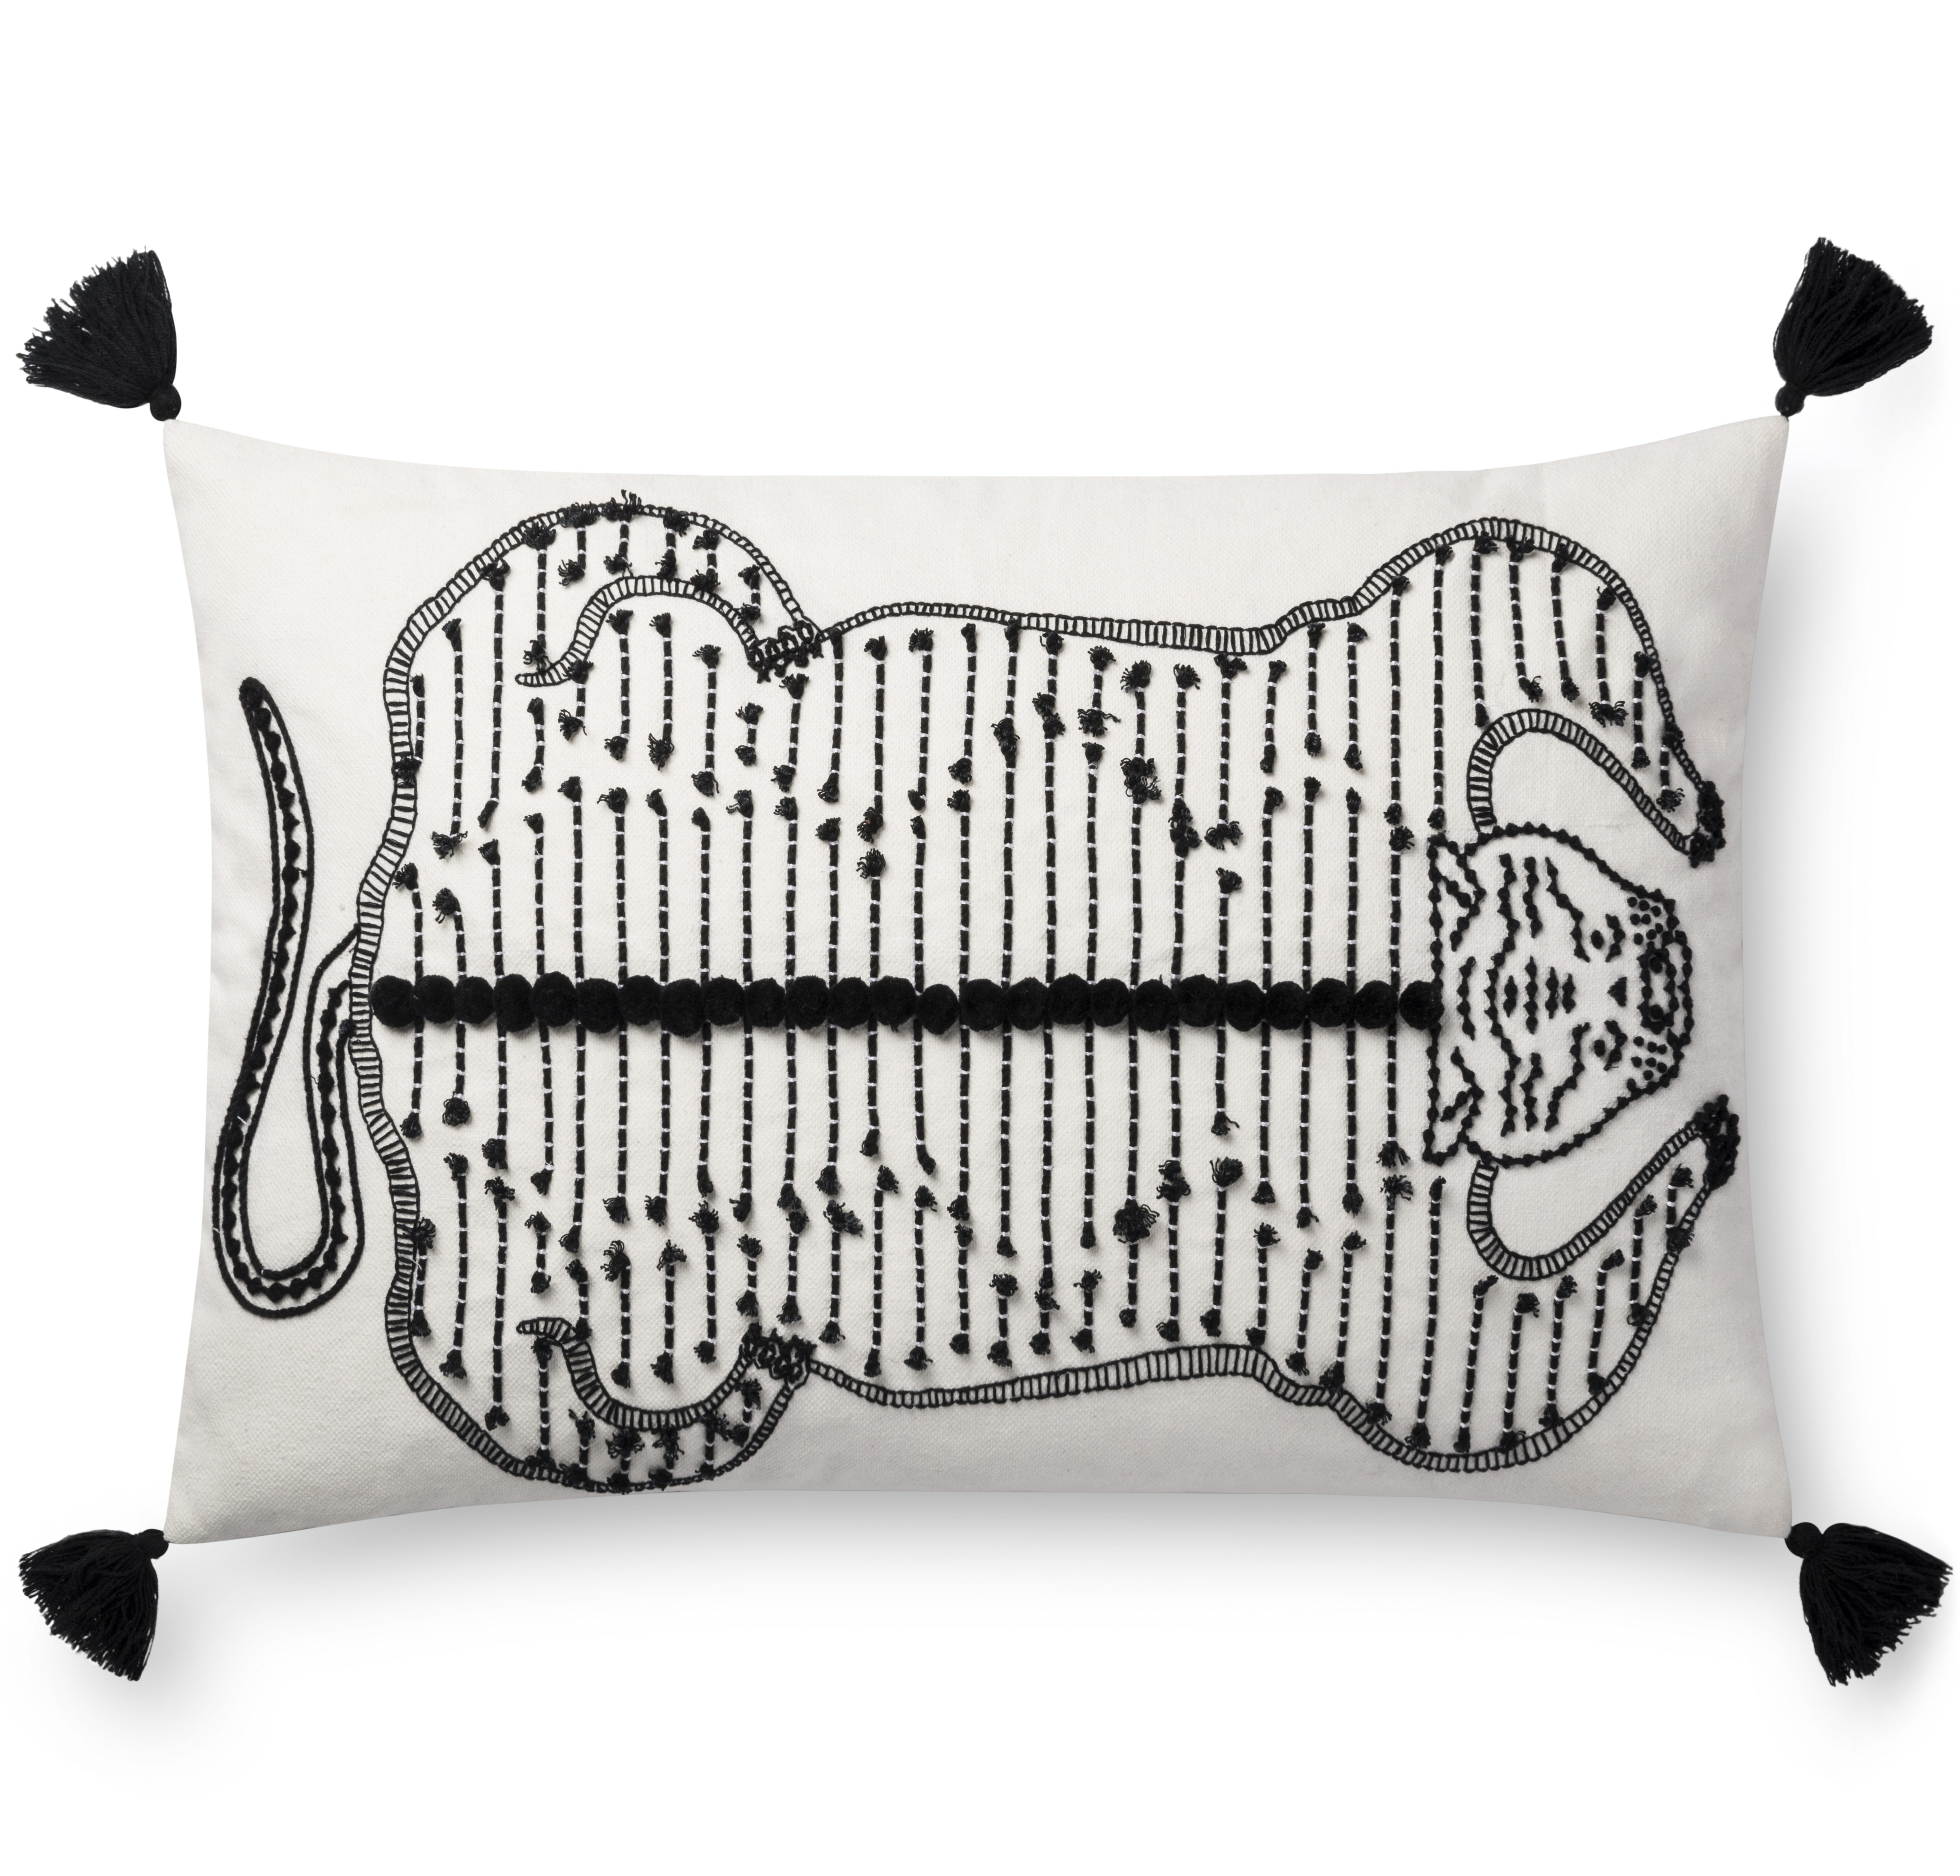 Throw Pillow Cover with Tassels, White & Black, 26" x 16" - Justina Blakeney x Loloi Rugs